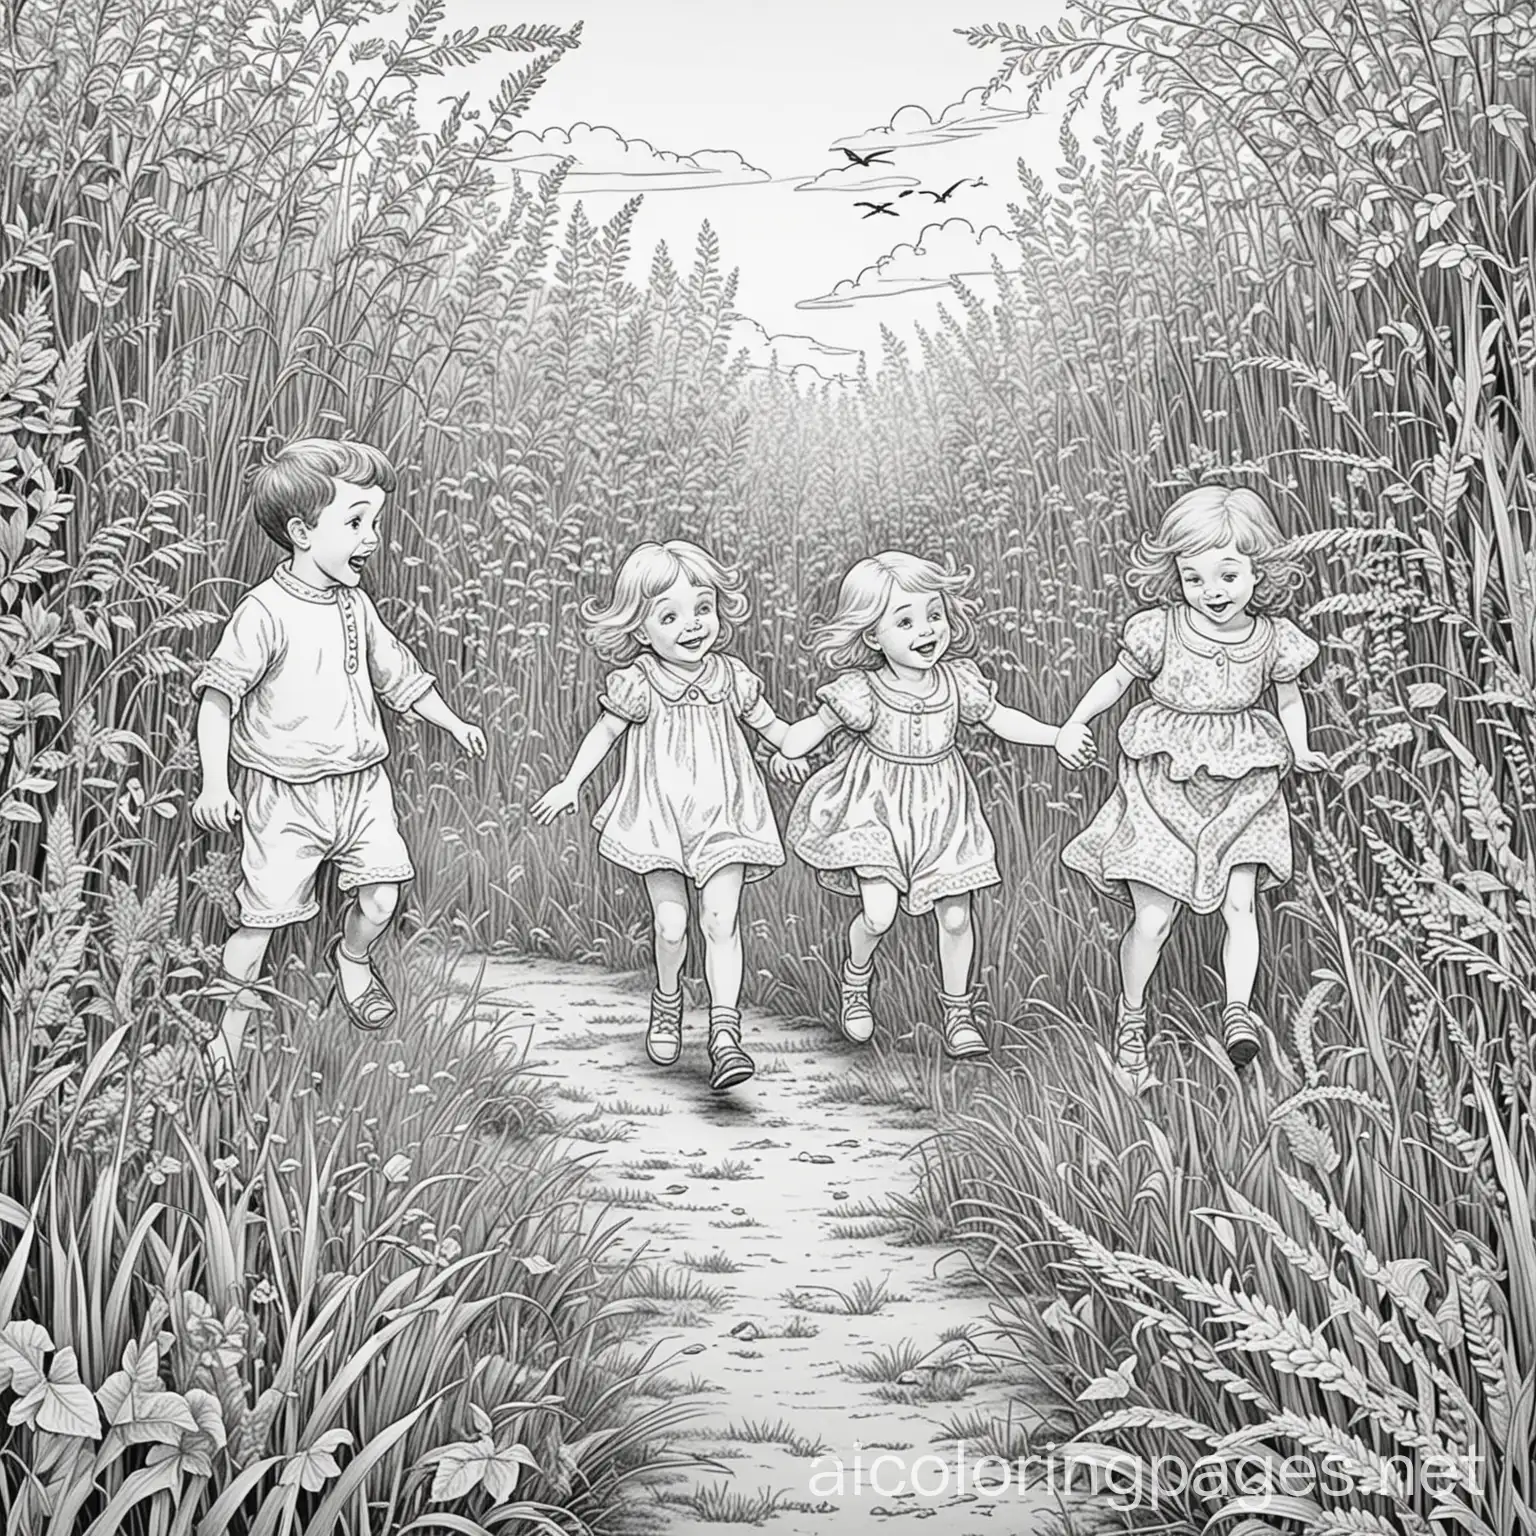 Once upon a time, in a meadow nestled at the edge of the Enchanted Forest, there lived a group of lively toddlers and giggly infants. Their tiny legs wiggled with boundless energy, and their laughter echoed through the tall grass. But there was a problem—their wiggles were getting out of control!, Coloring Page, black and white, line art, white background, Simplicity, Ample White Space. The background of the coloring page is plain white to make it easy for young children to color within the lines. The outlines of all the subjects are easy to distinguish, making it simple for kids to color without too much difficulty